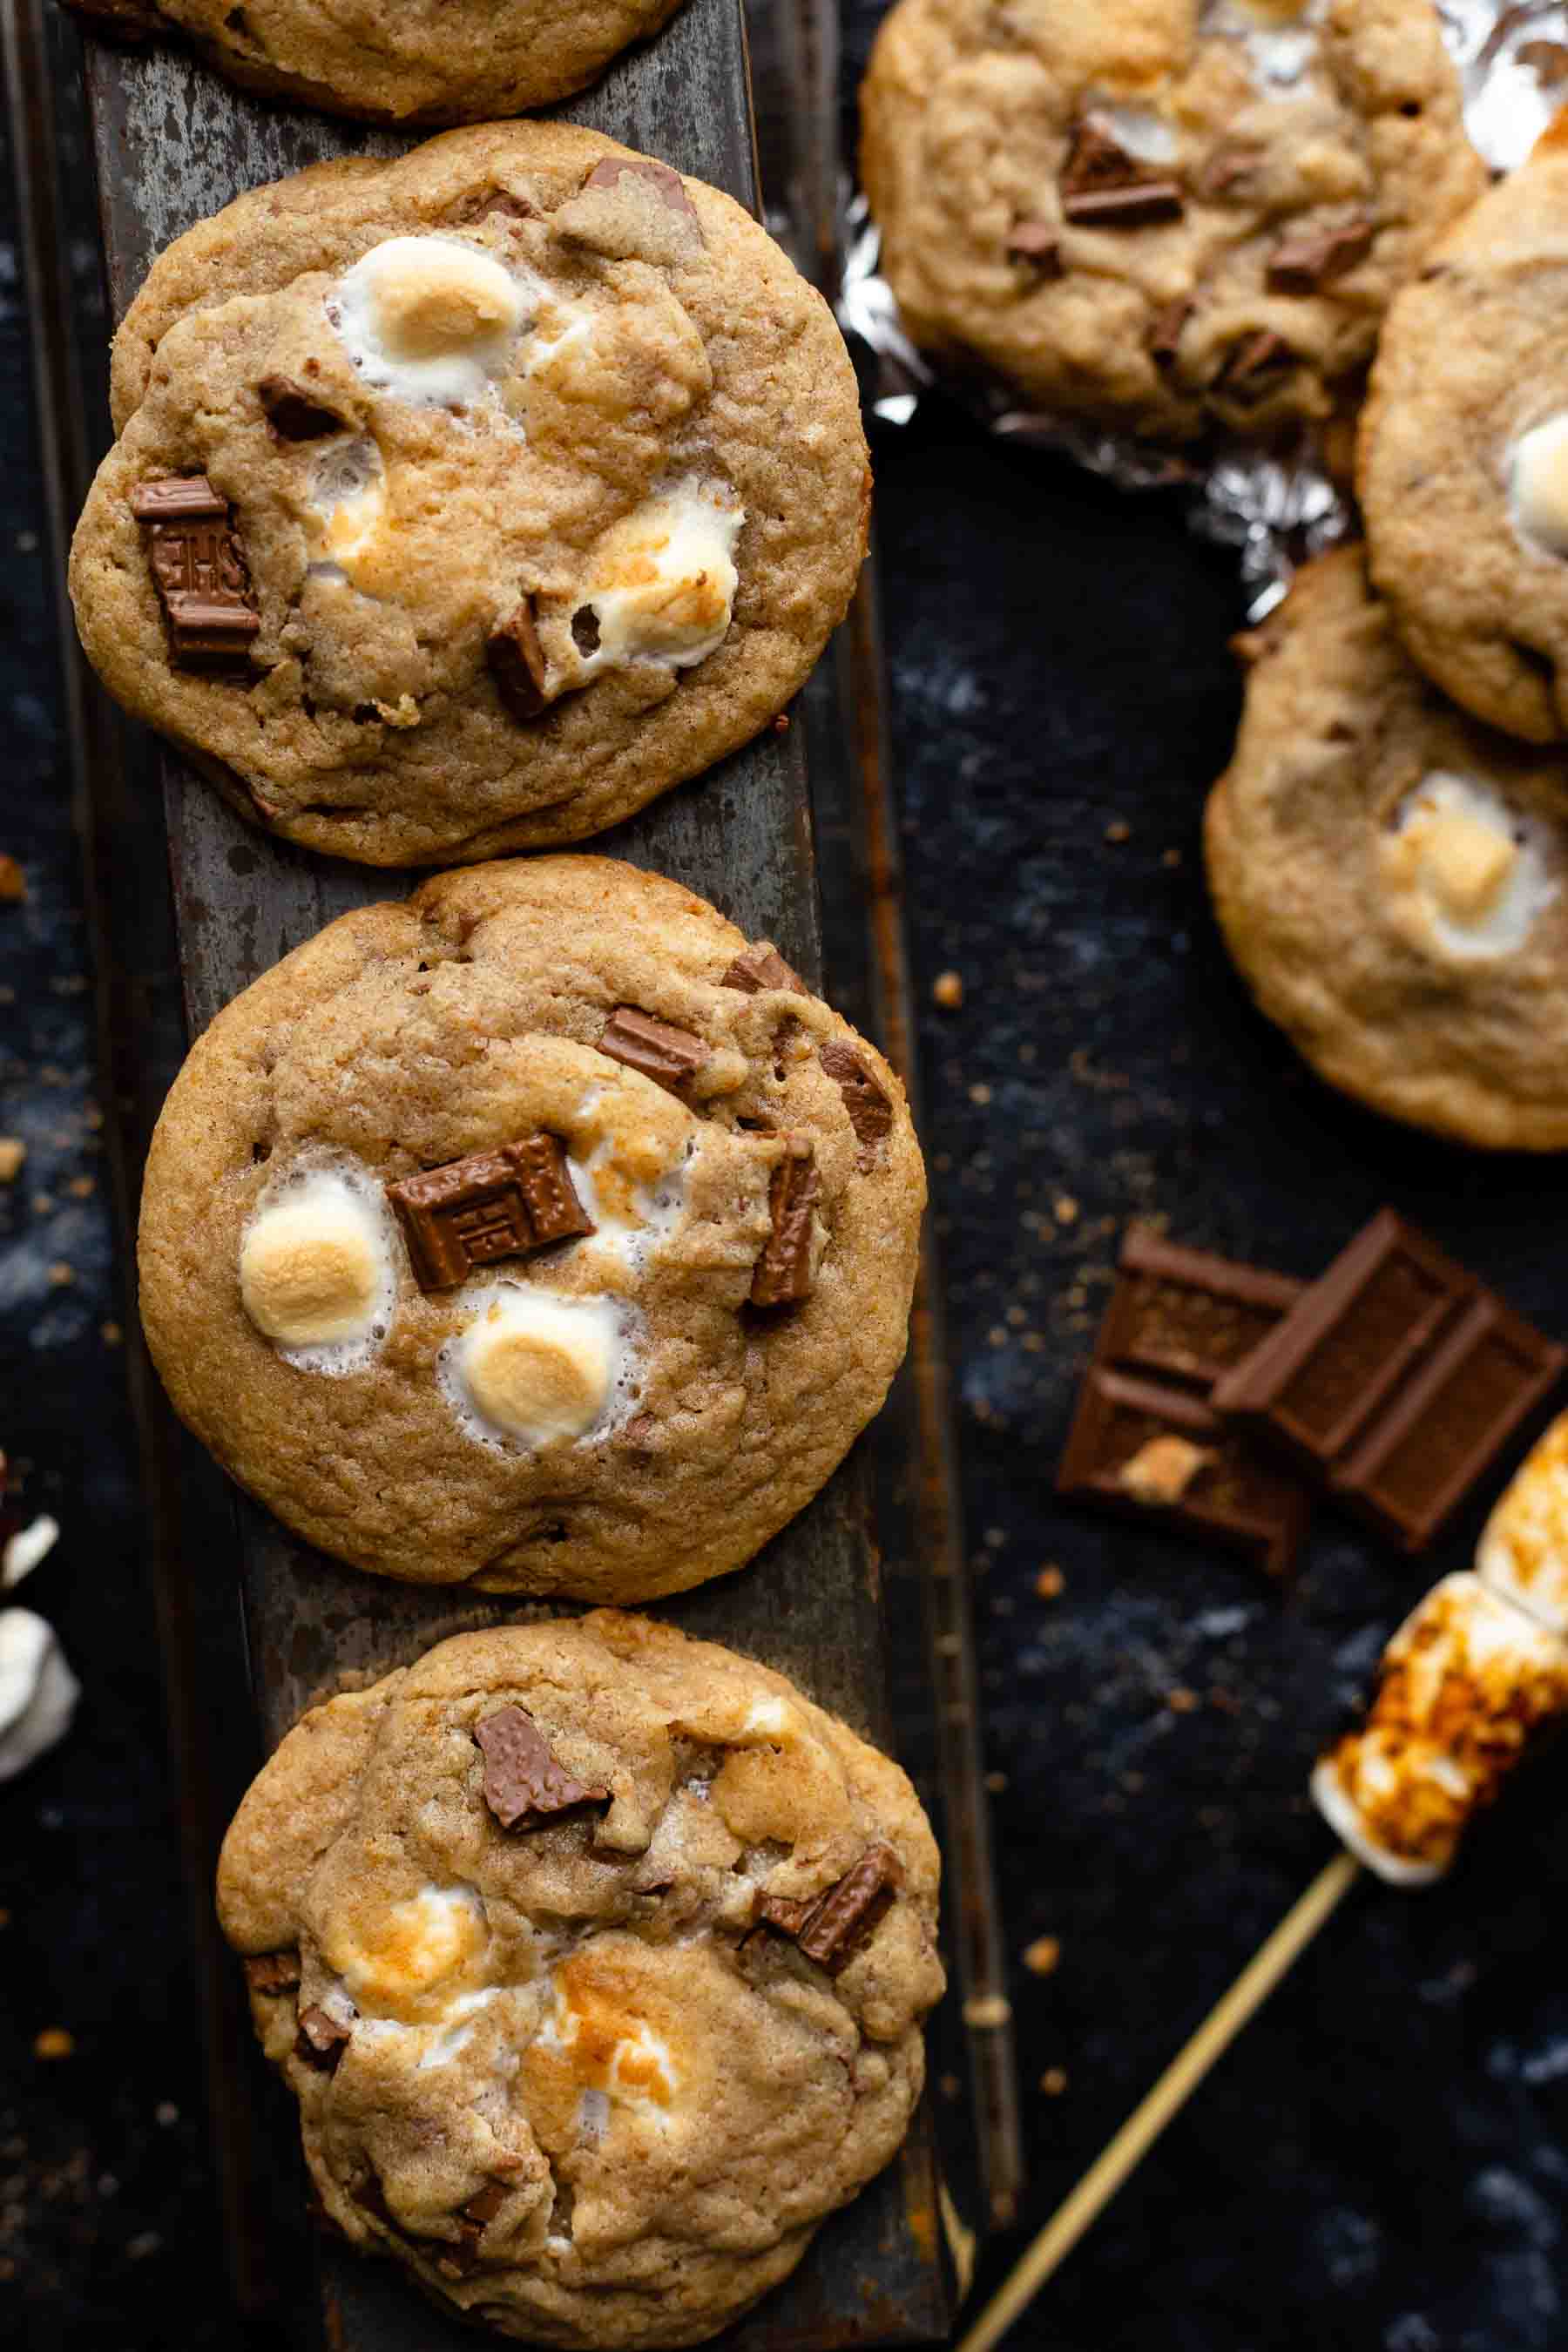 a half dozen baked cookies filled with chocolate pieces and marshmallows on a dark table